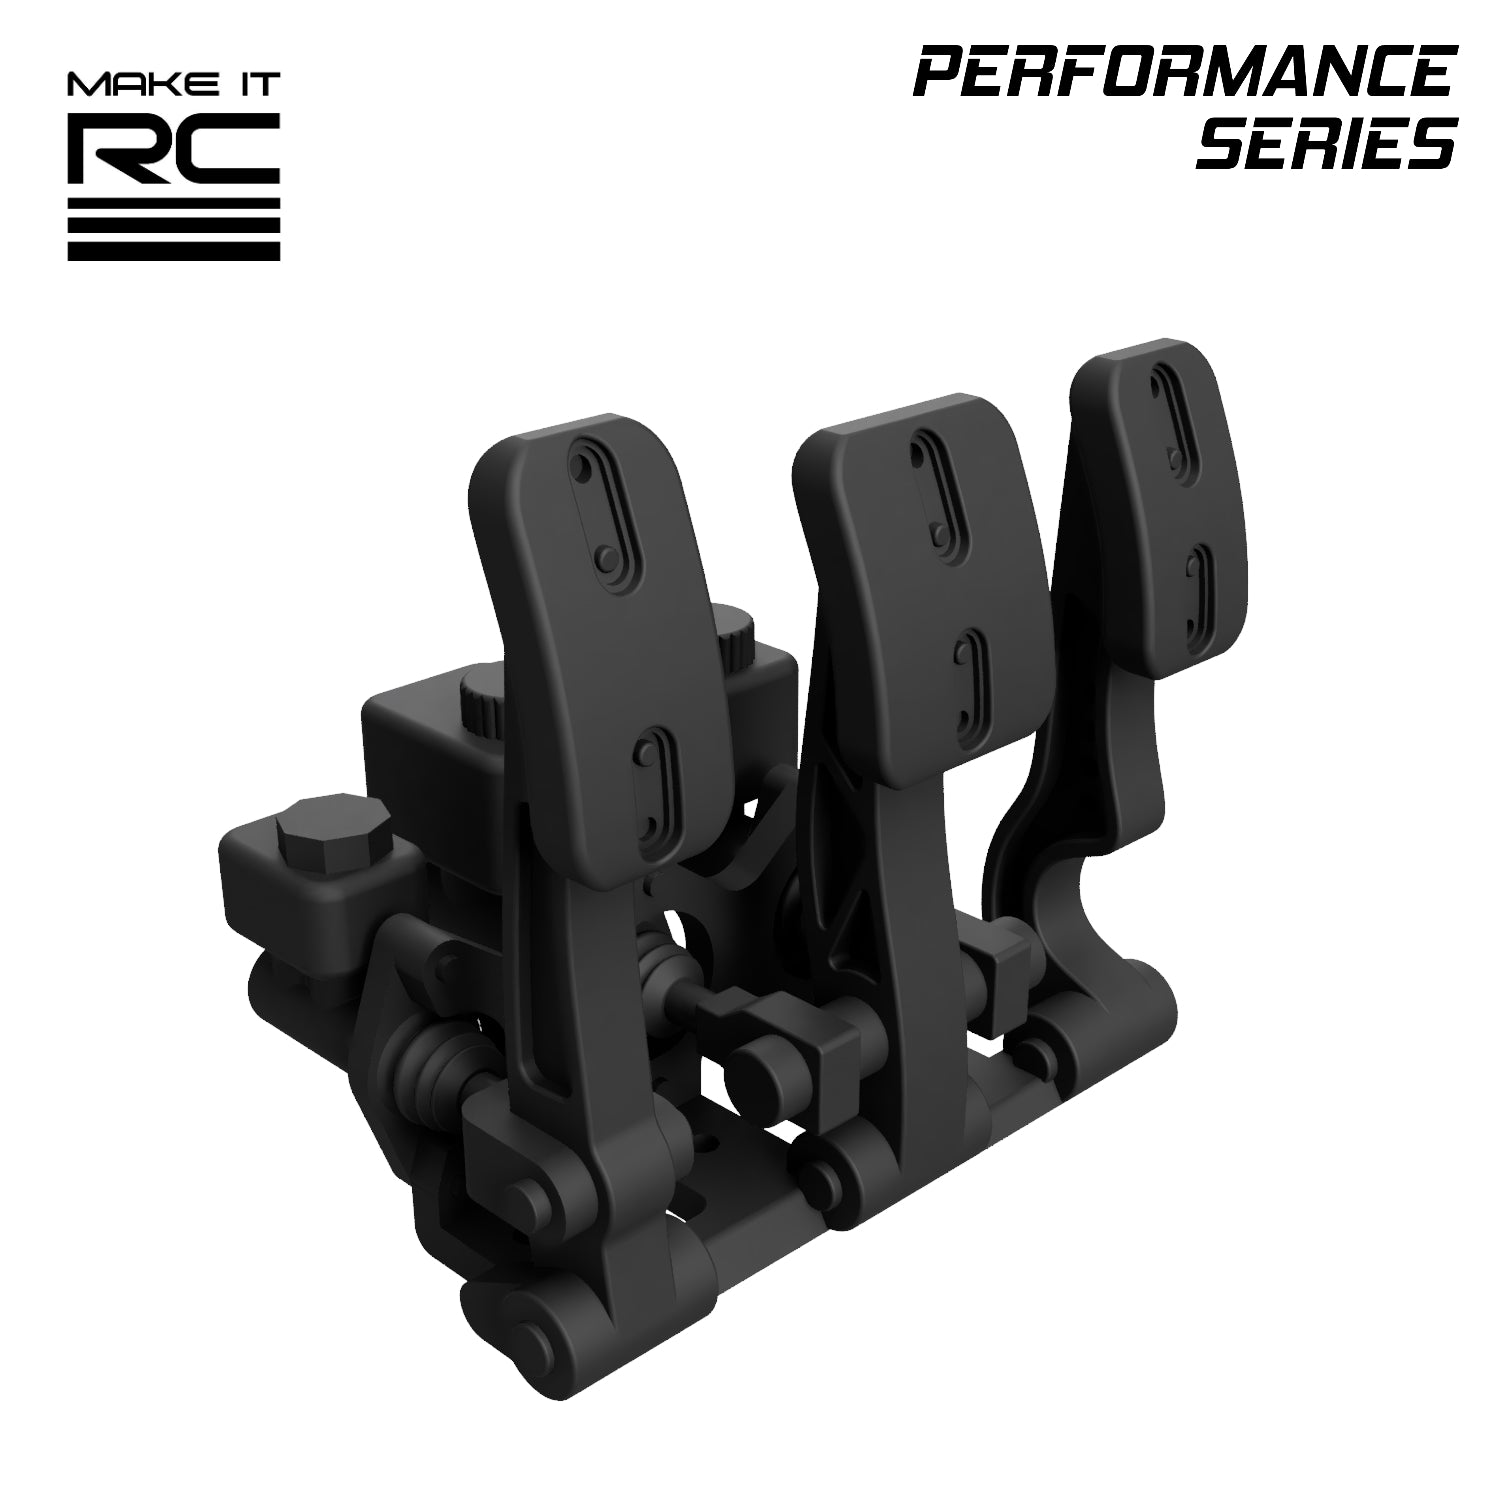 Make It RC RP-1 Racing Pedals for 1/10 Scale RC Car and Truck (STL Download)